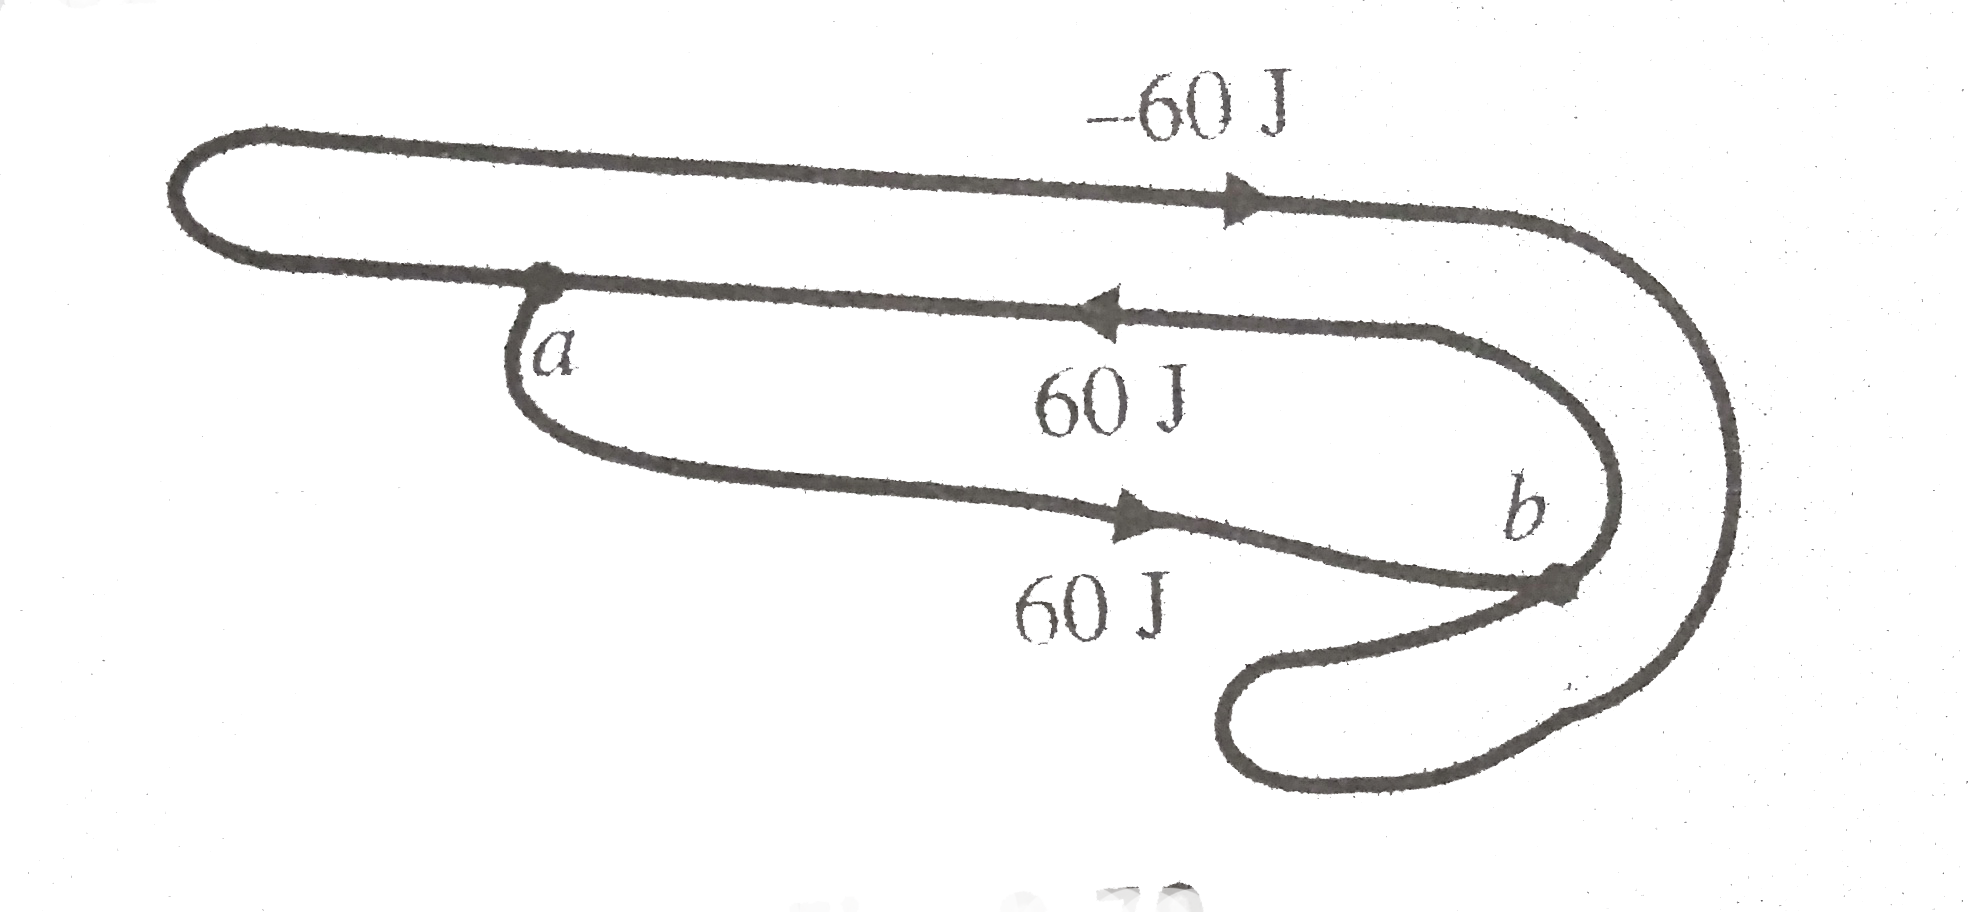 Figure shows three paths connecting points a and b, A single force F does the indicated work on a particle moving along each path in the indicated direction. On the basis of this information, is force F conservative?